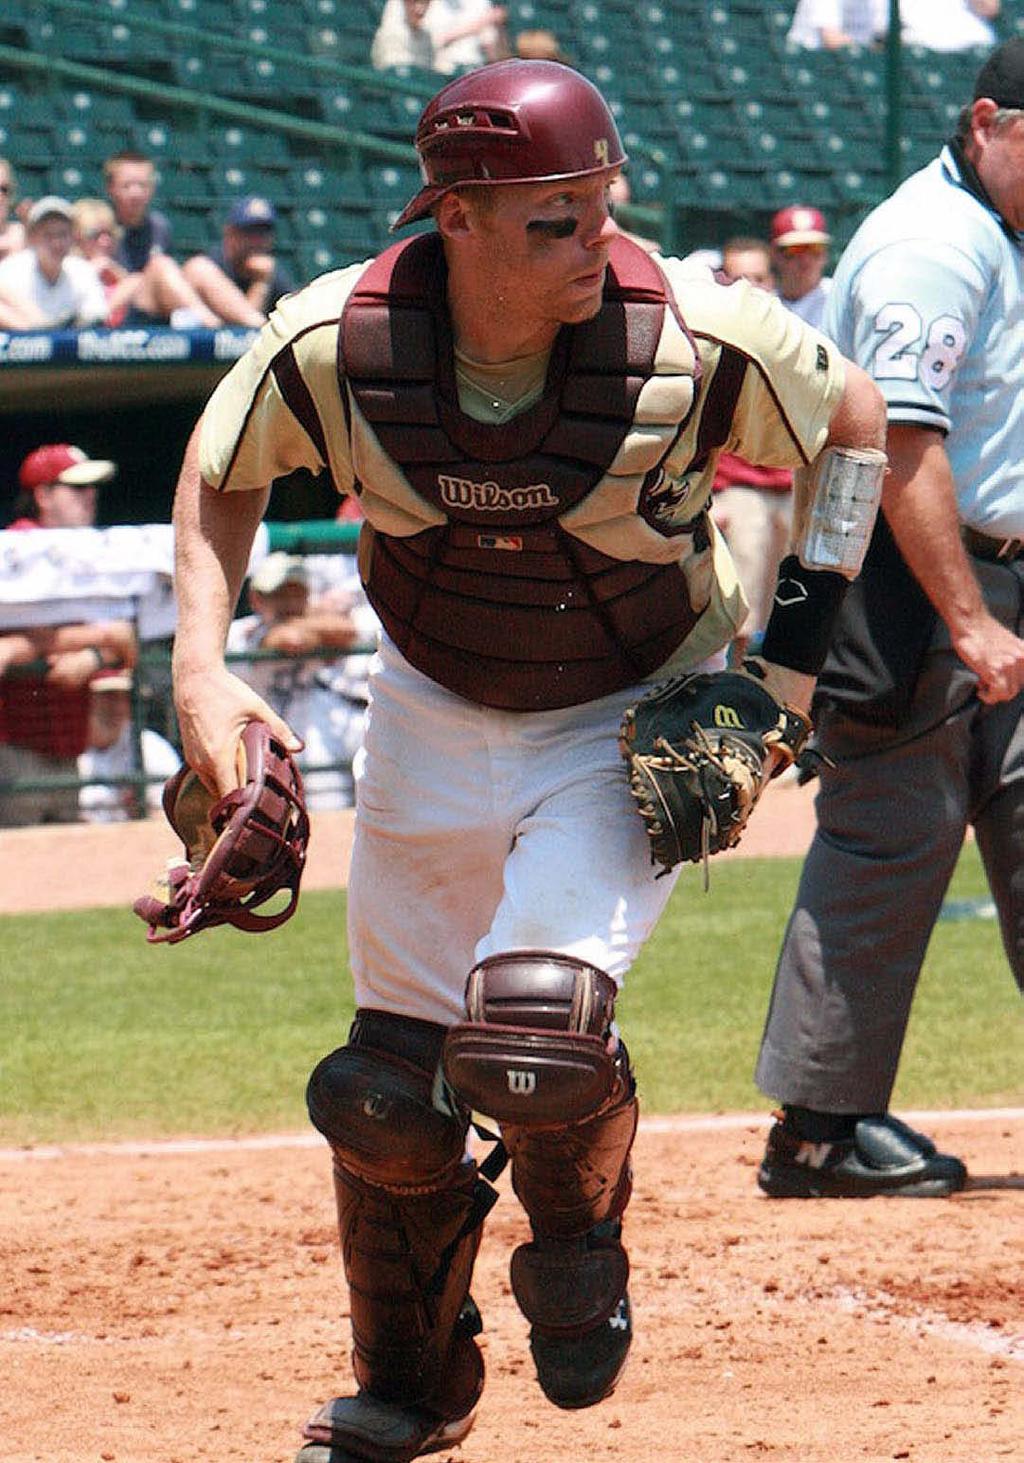 4 GAET SMITH Senior, INF/C/HP 6-, 6, / St. John s/sterling, Mass. AS A JUNIO () Appeared in 49 games and started 47 at catcher moved from shortstop to behind the plate in the offseason batted.